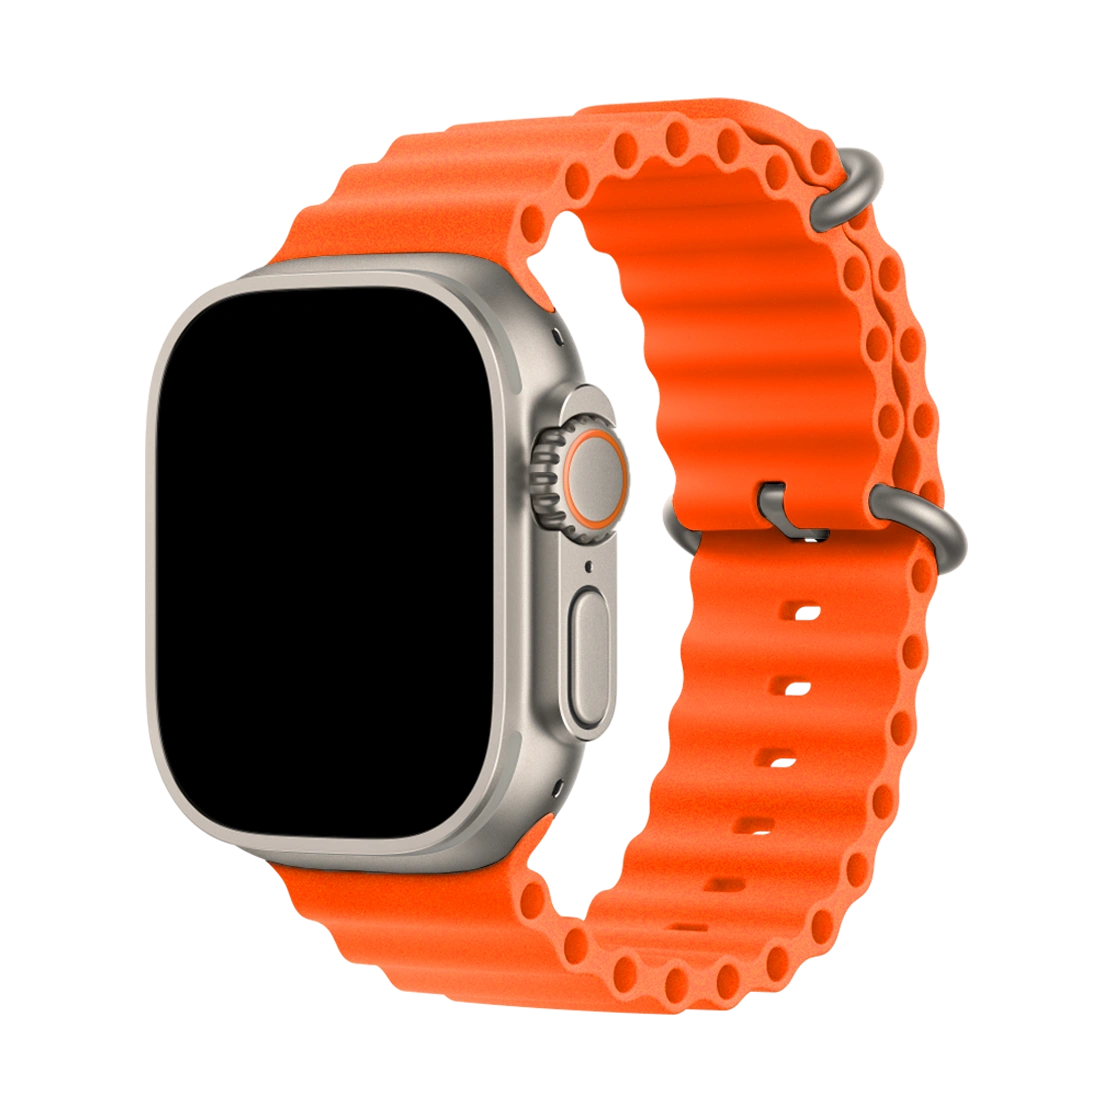 Apple Watch Series 8 Red Aluminum Case with Red Sport Band